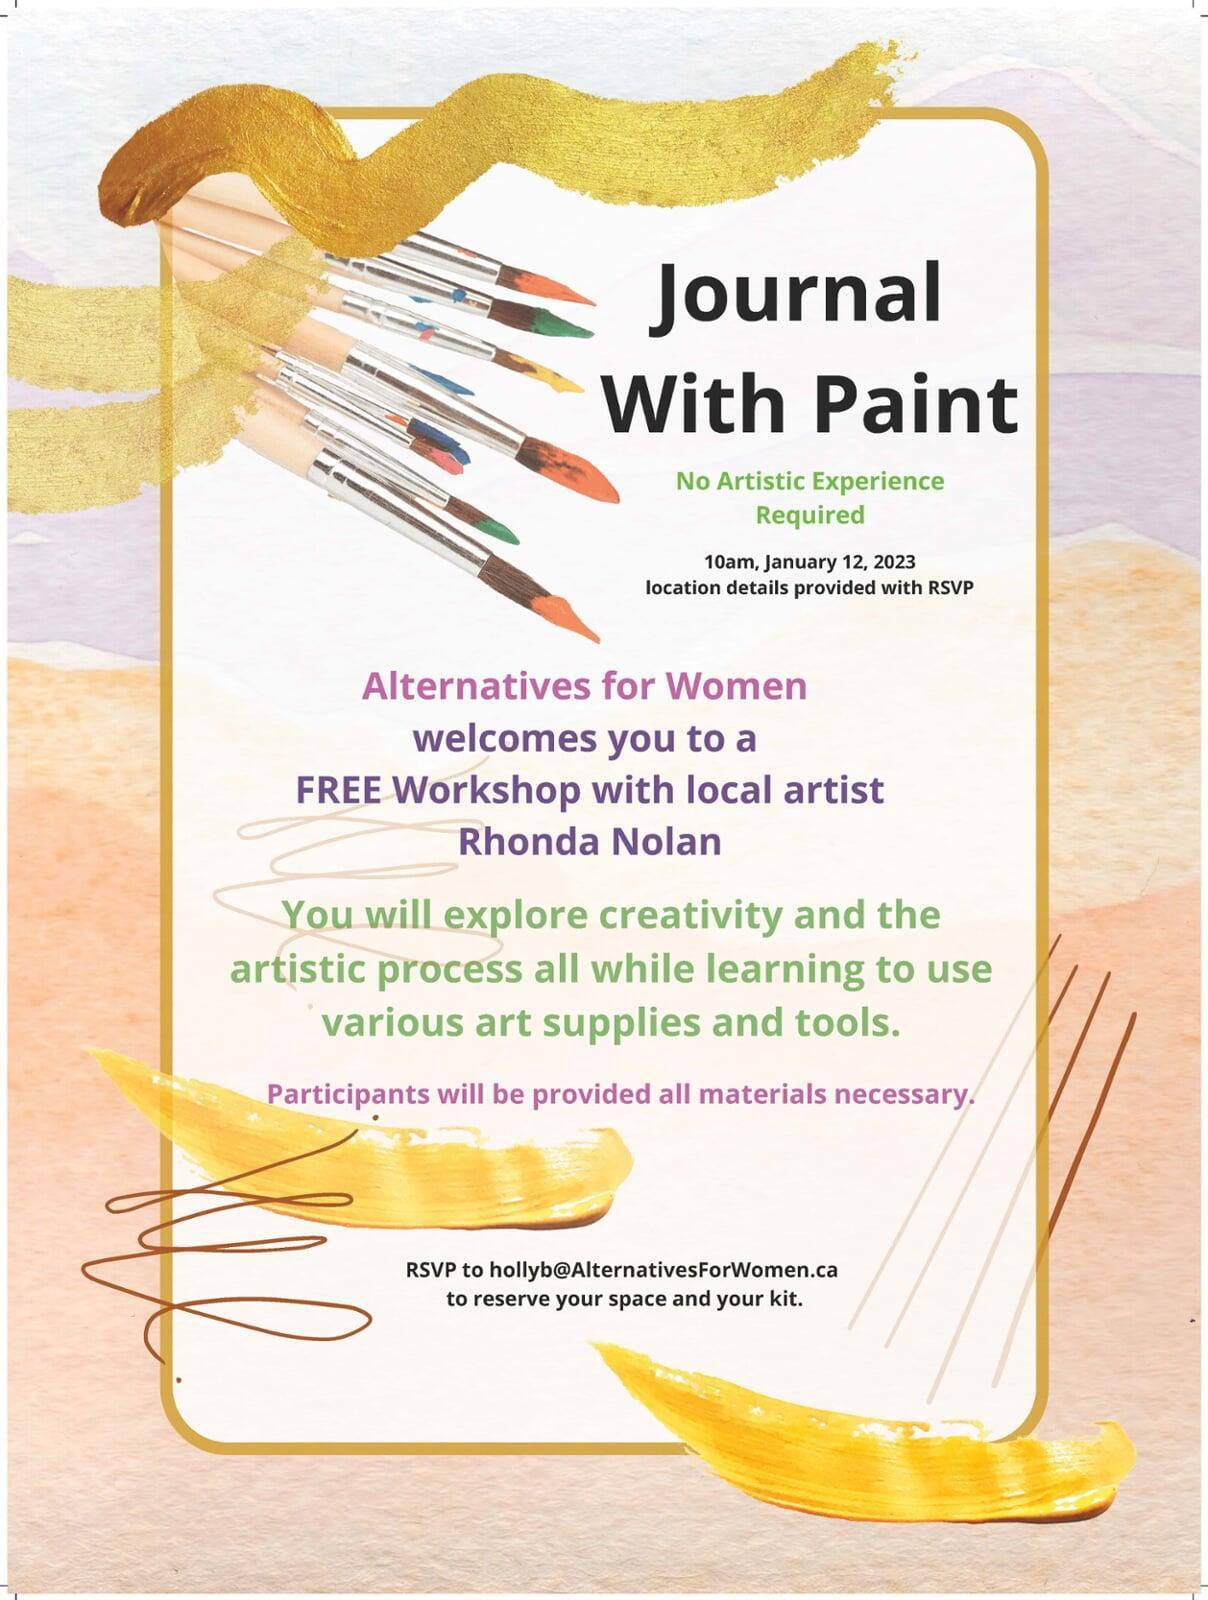 Journal with Paint January 12th, 10am